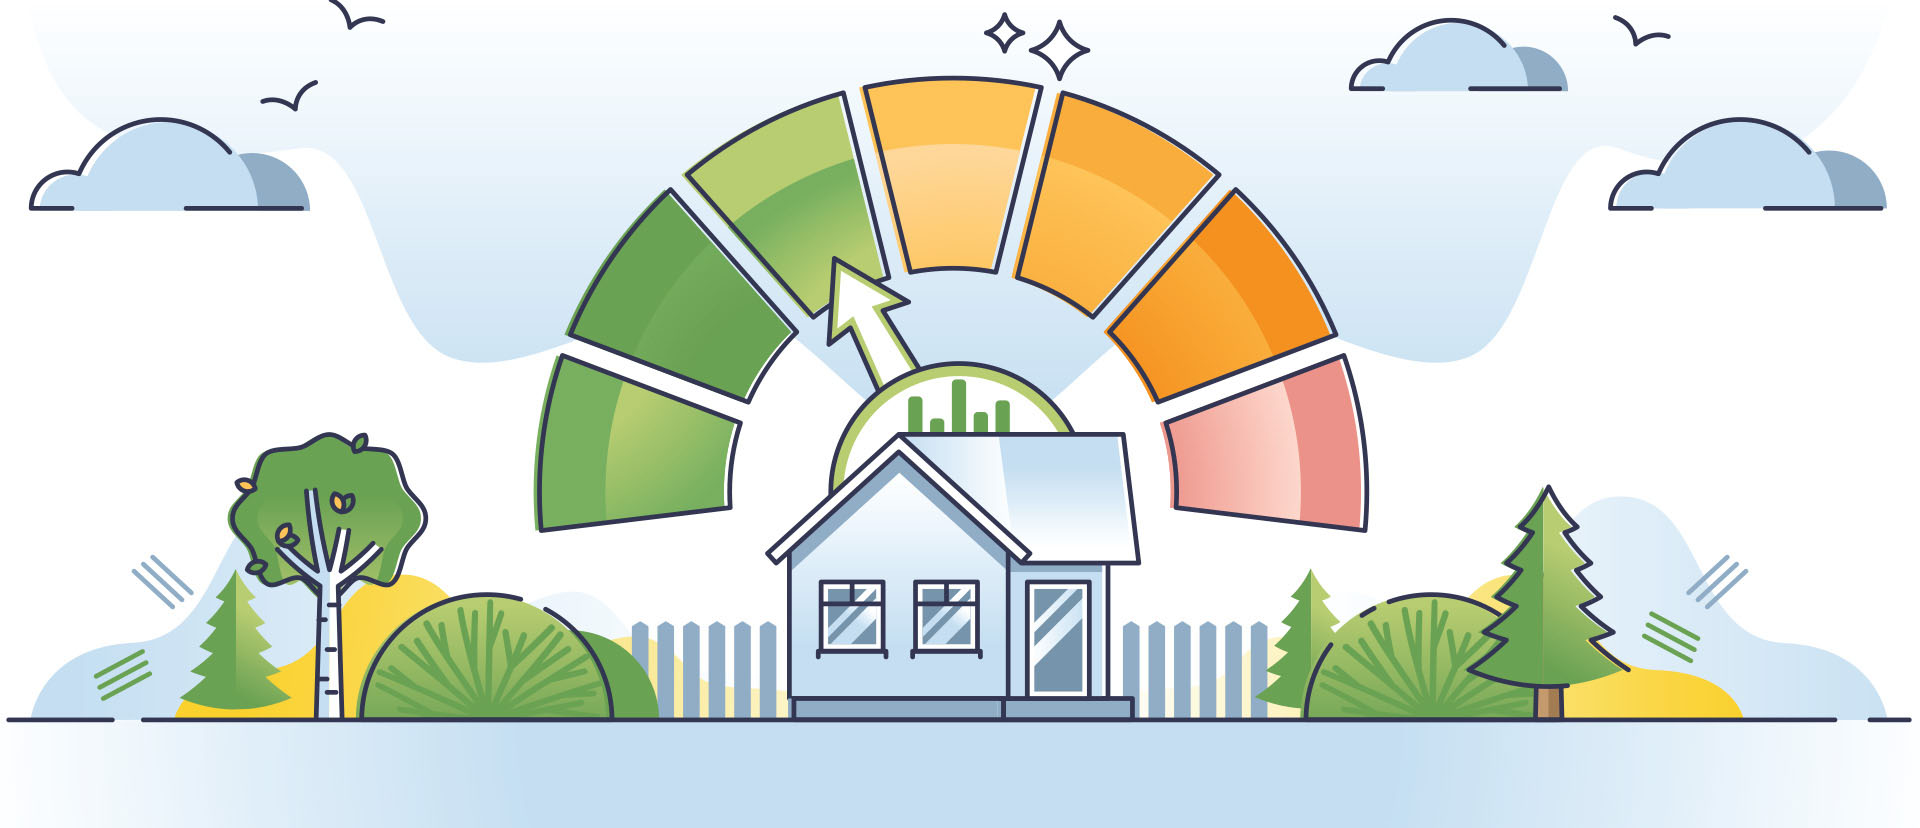 Featured image for “HERS index and home efficiency, why it matters”